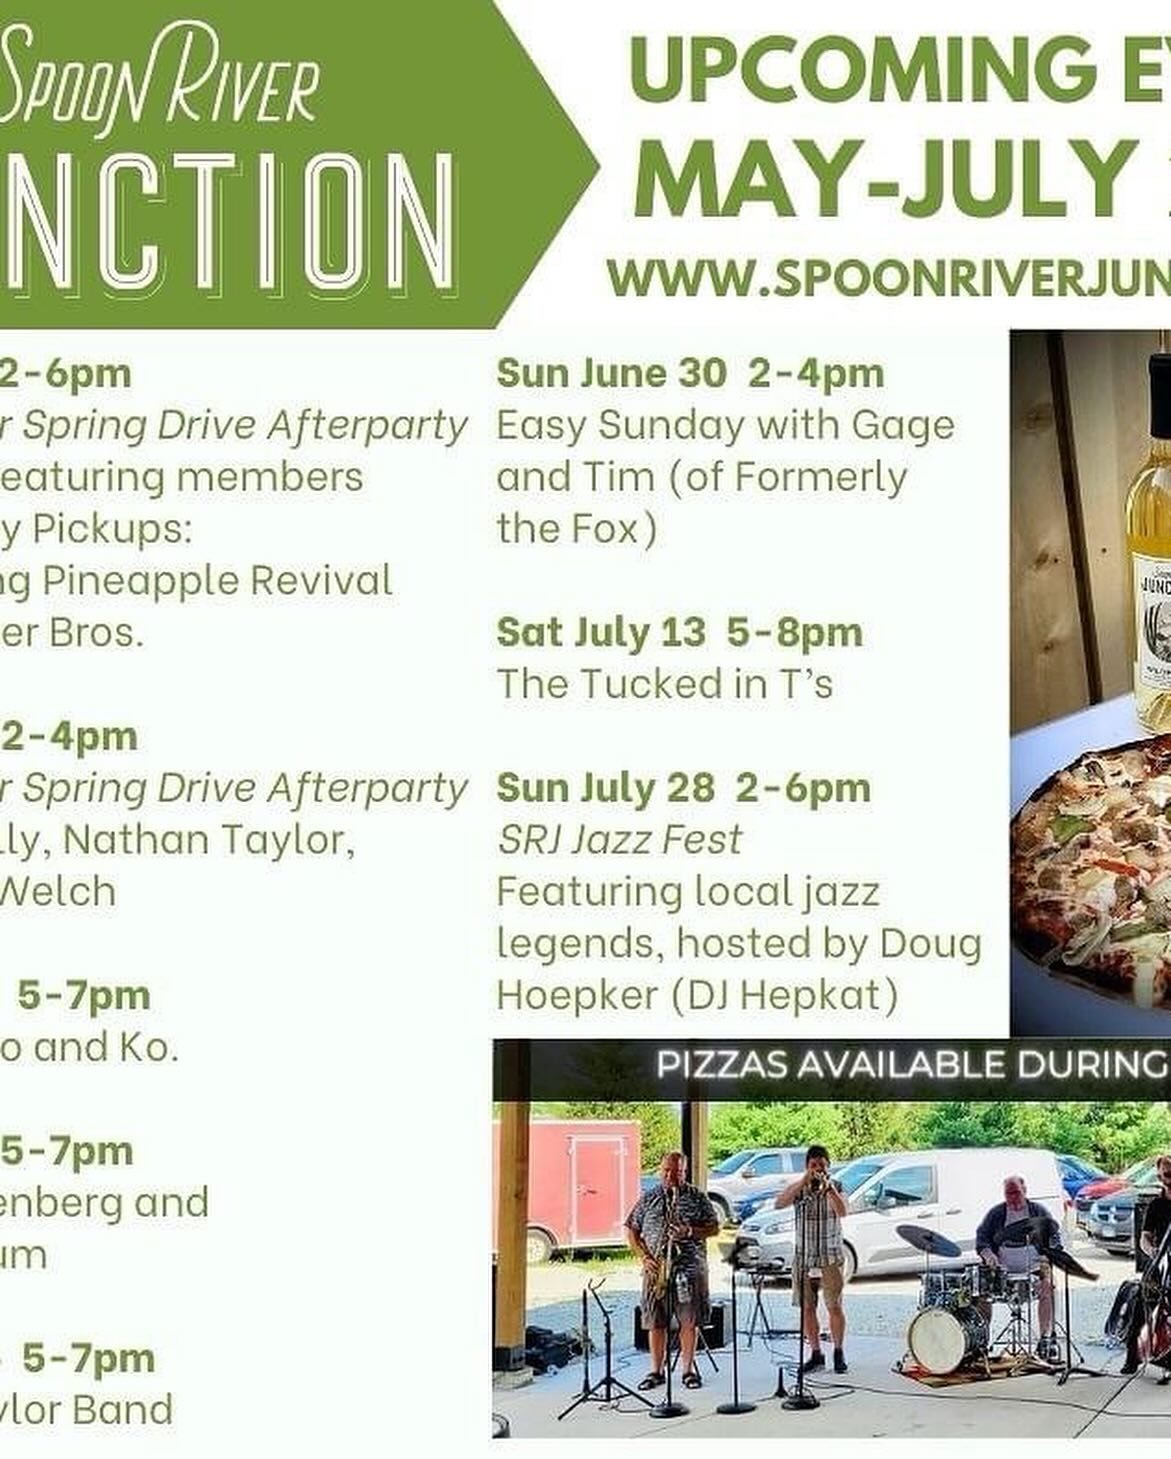 Happy Friday!!

The rain is heading out and we know it&rsquo;s going to be a little breezy today but it&rsquo;s a great weekend to have the patio open. 

Make sure and check out the summer schedule! 
Live music, patio pizzas, and plenty of fun for al